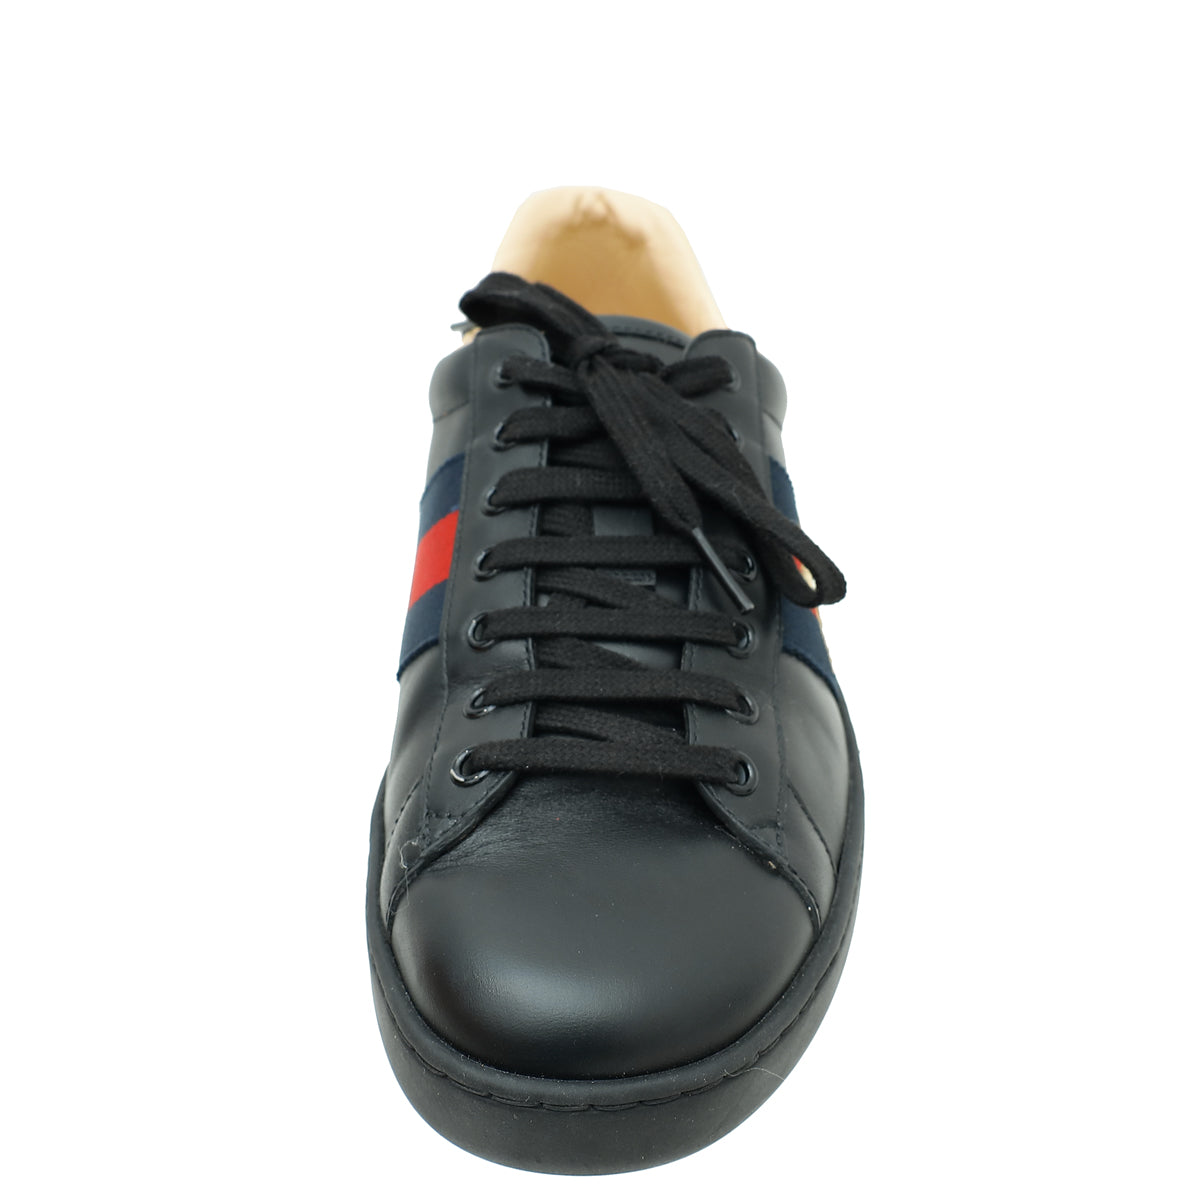 Gucci Black Ace Bee Embroidered Sneaker 8.5